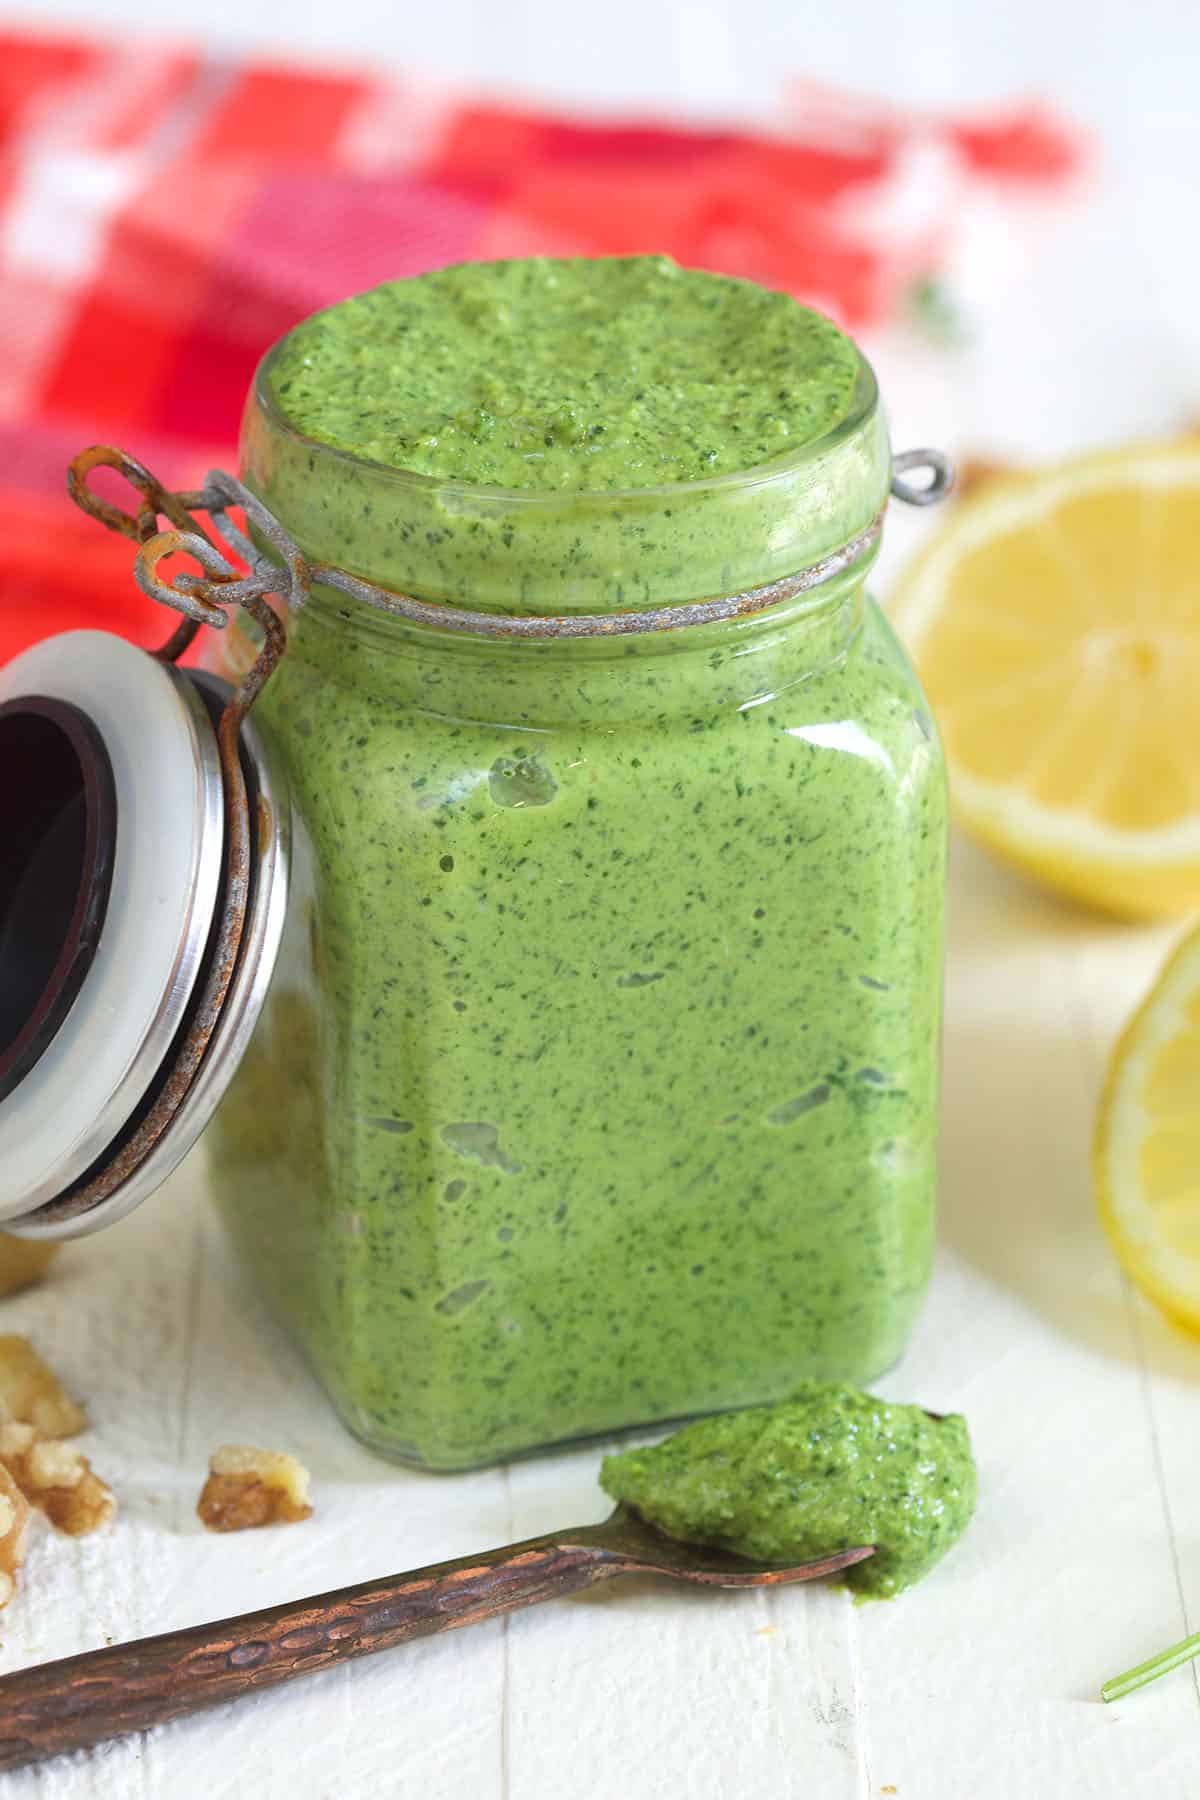 An open jar of pesto is placed next to a spoon with more pesto on it.